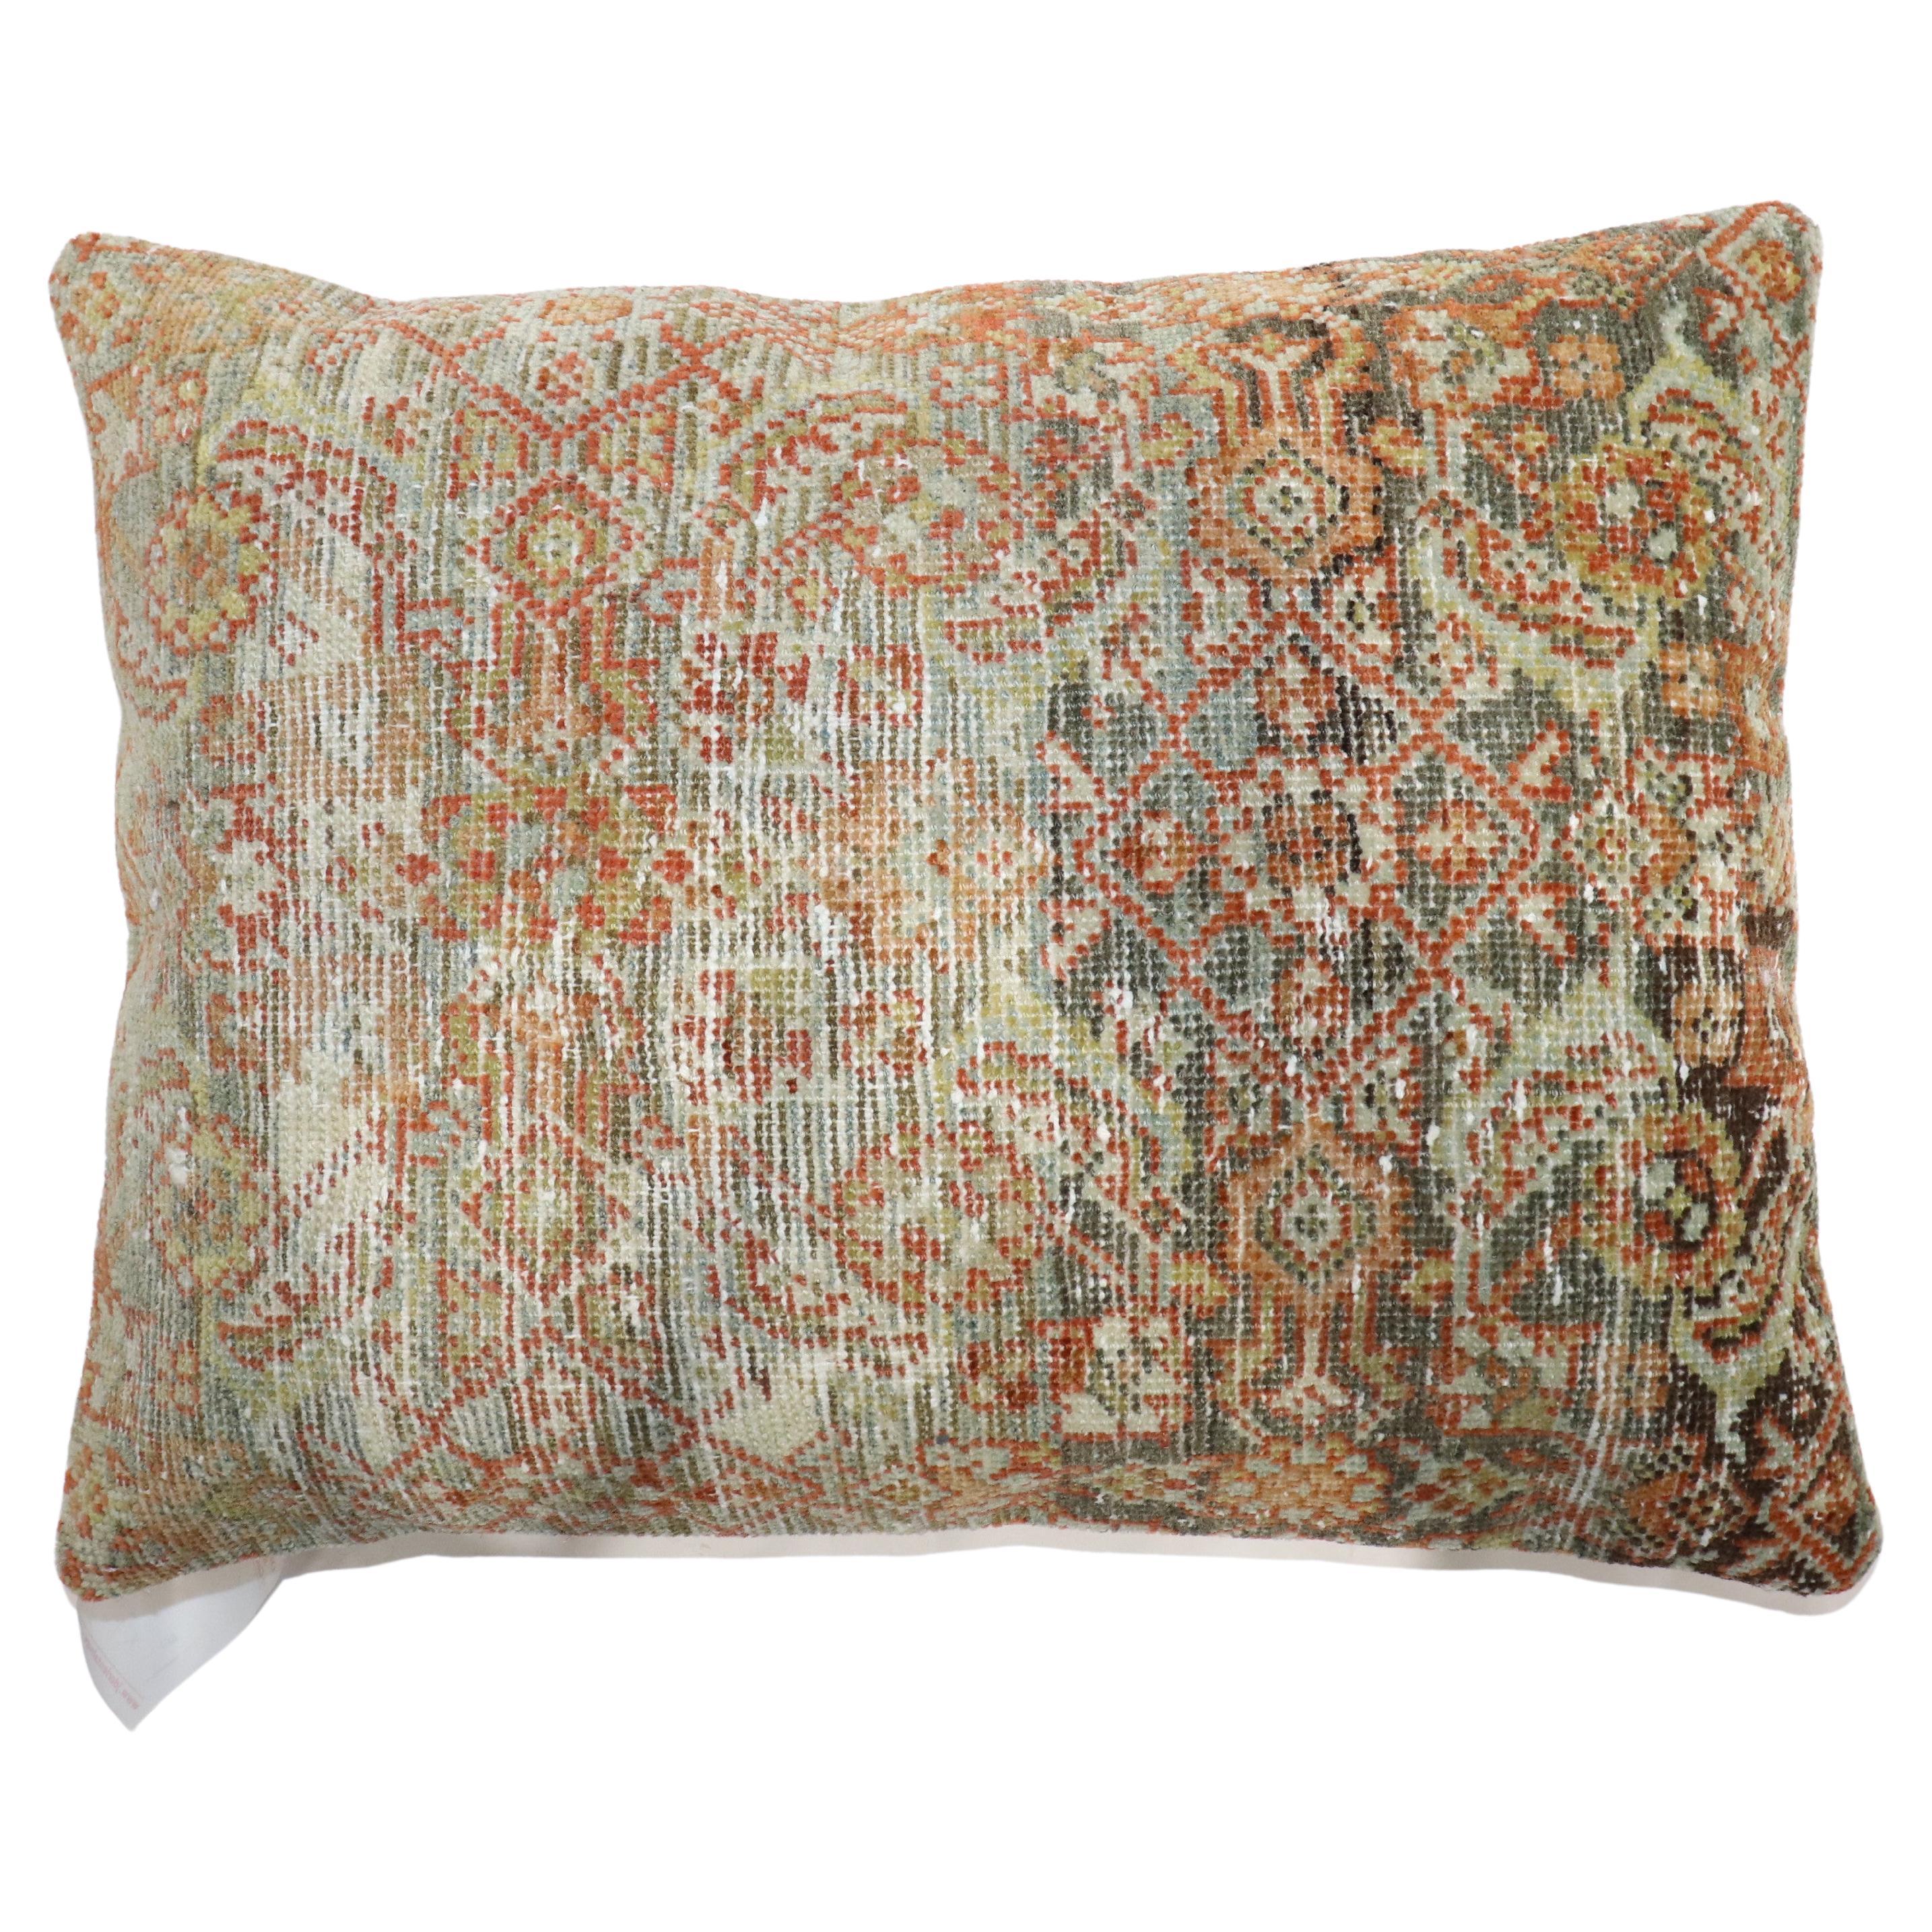 Pillow made from antique Persian Mahal rug with cotton back.

Measures: 17'' x 22''.